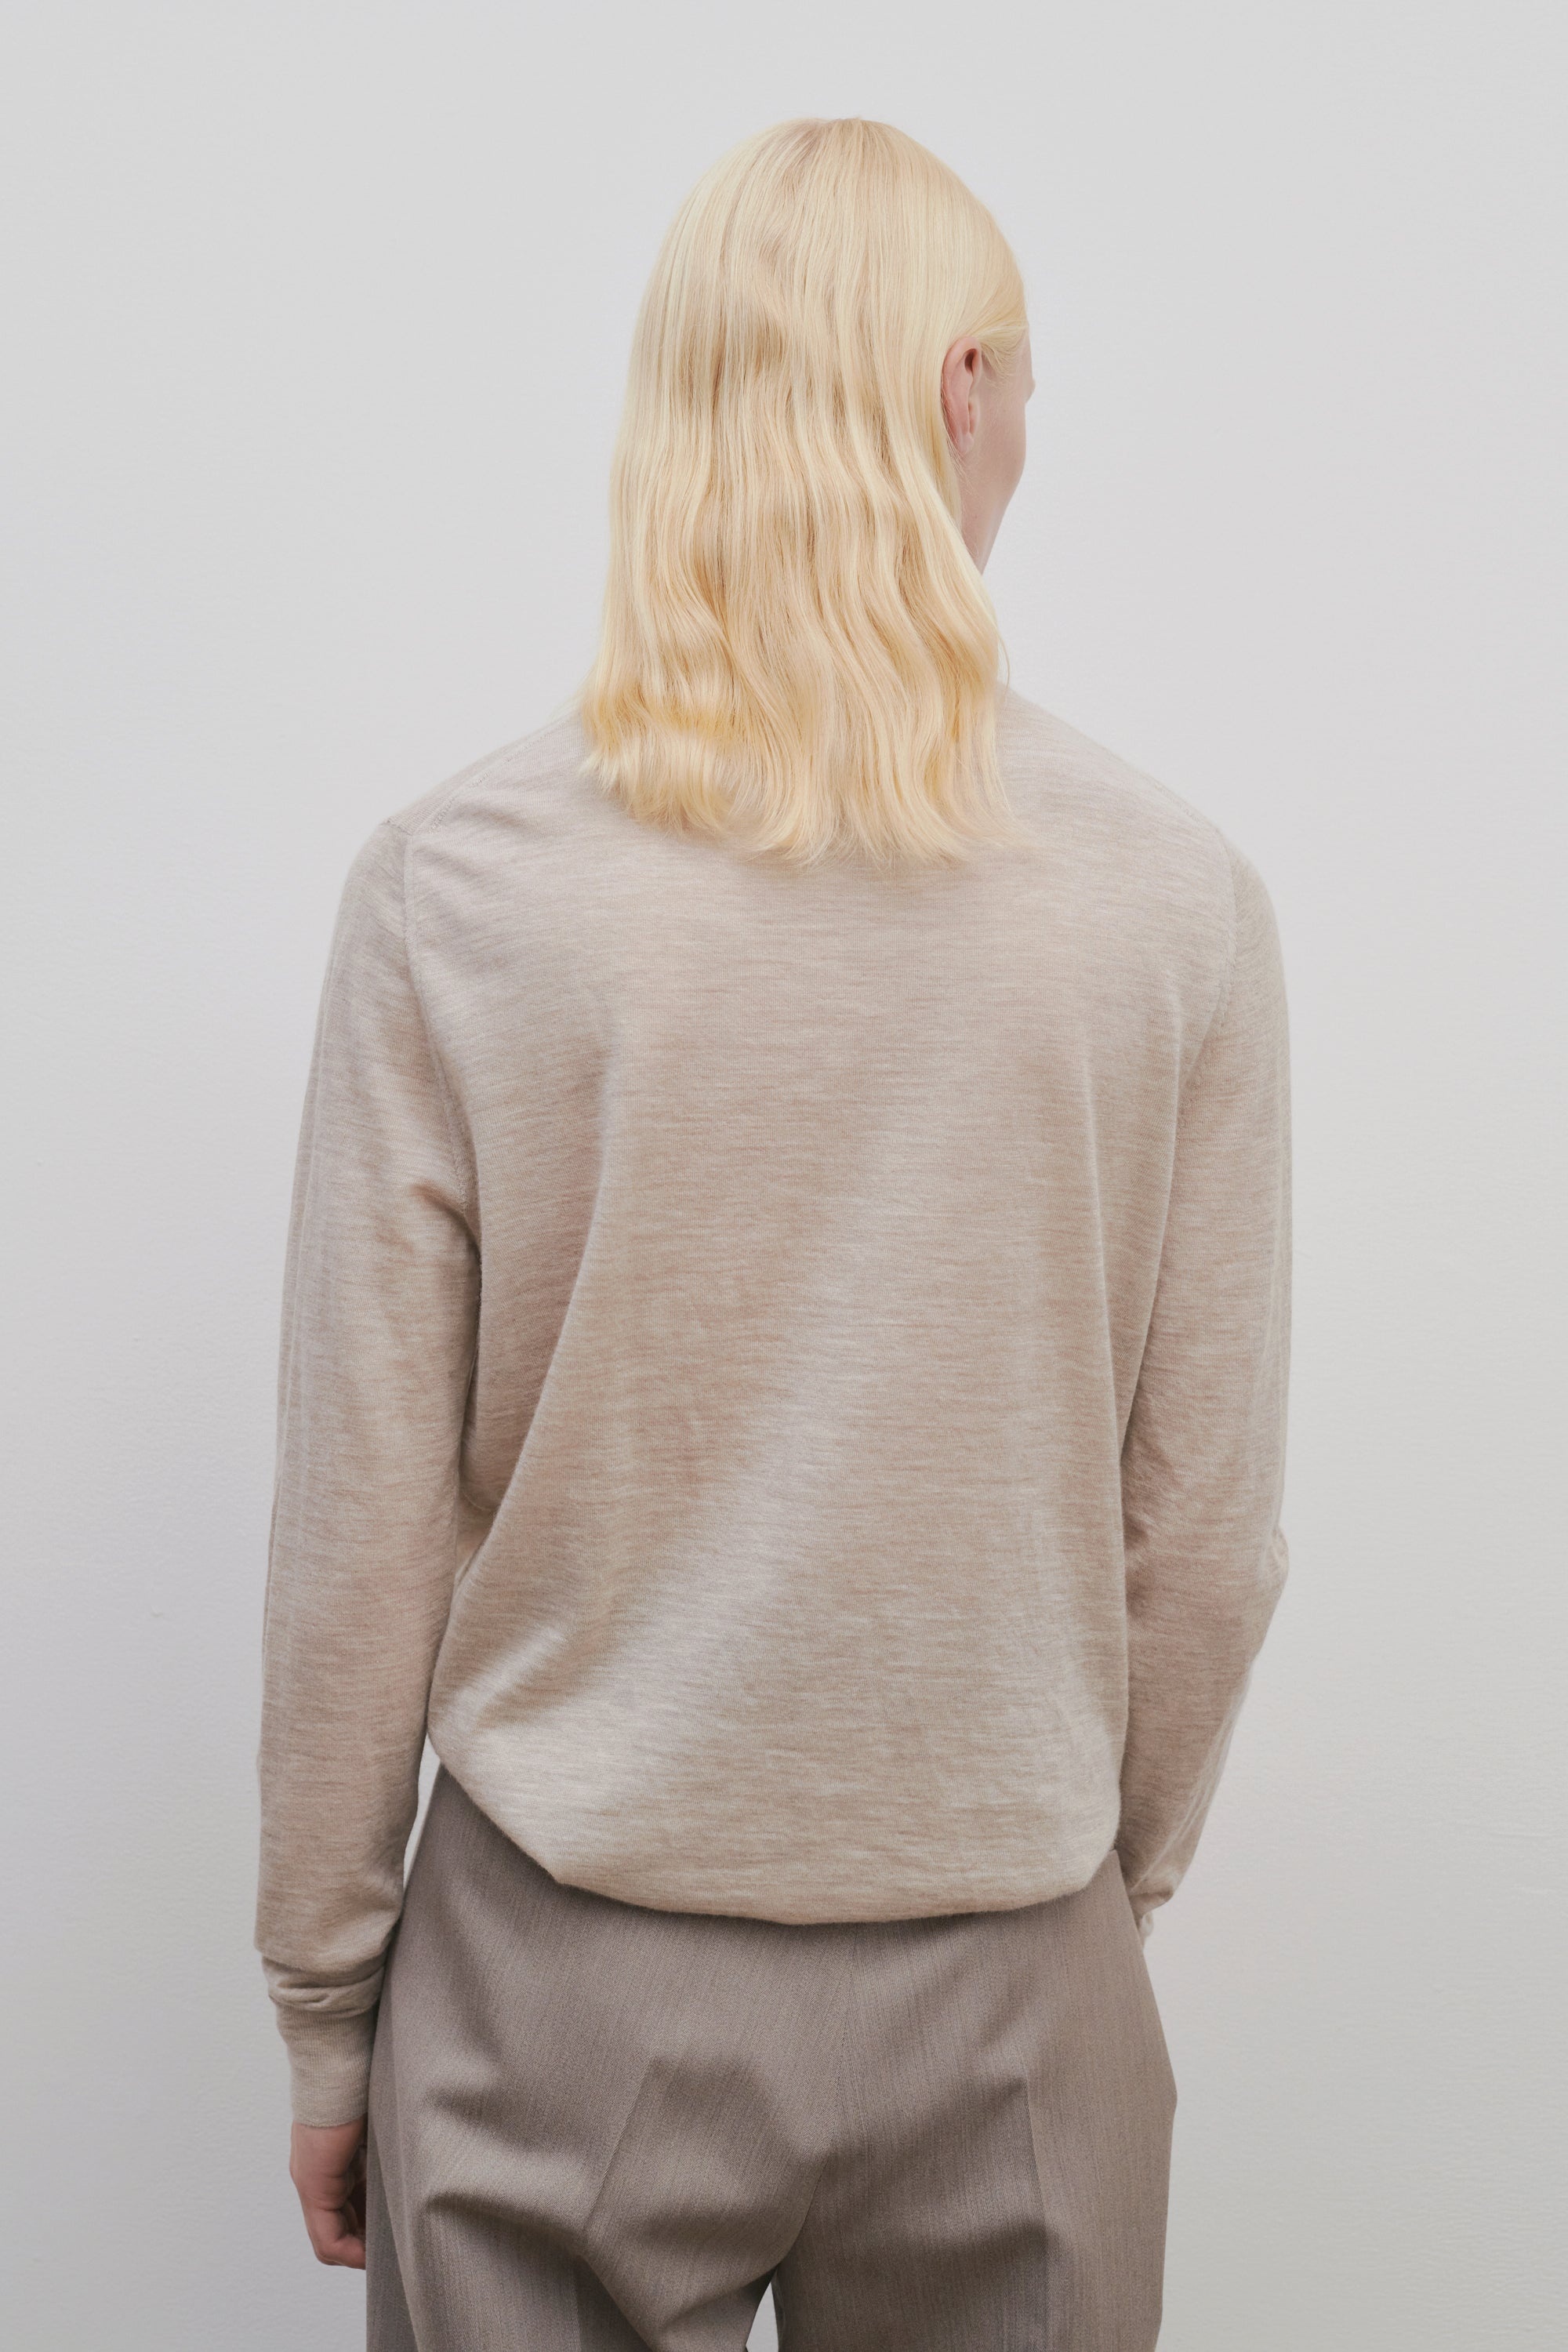 Exeter Top in Cashmere - 4